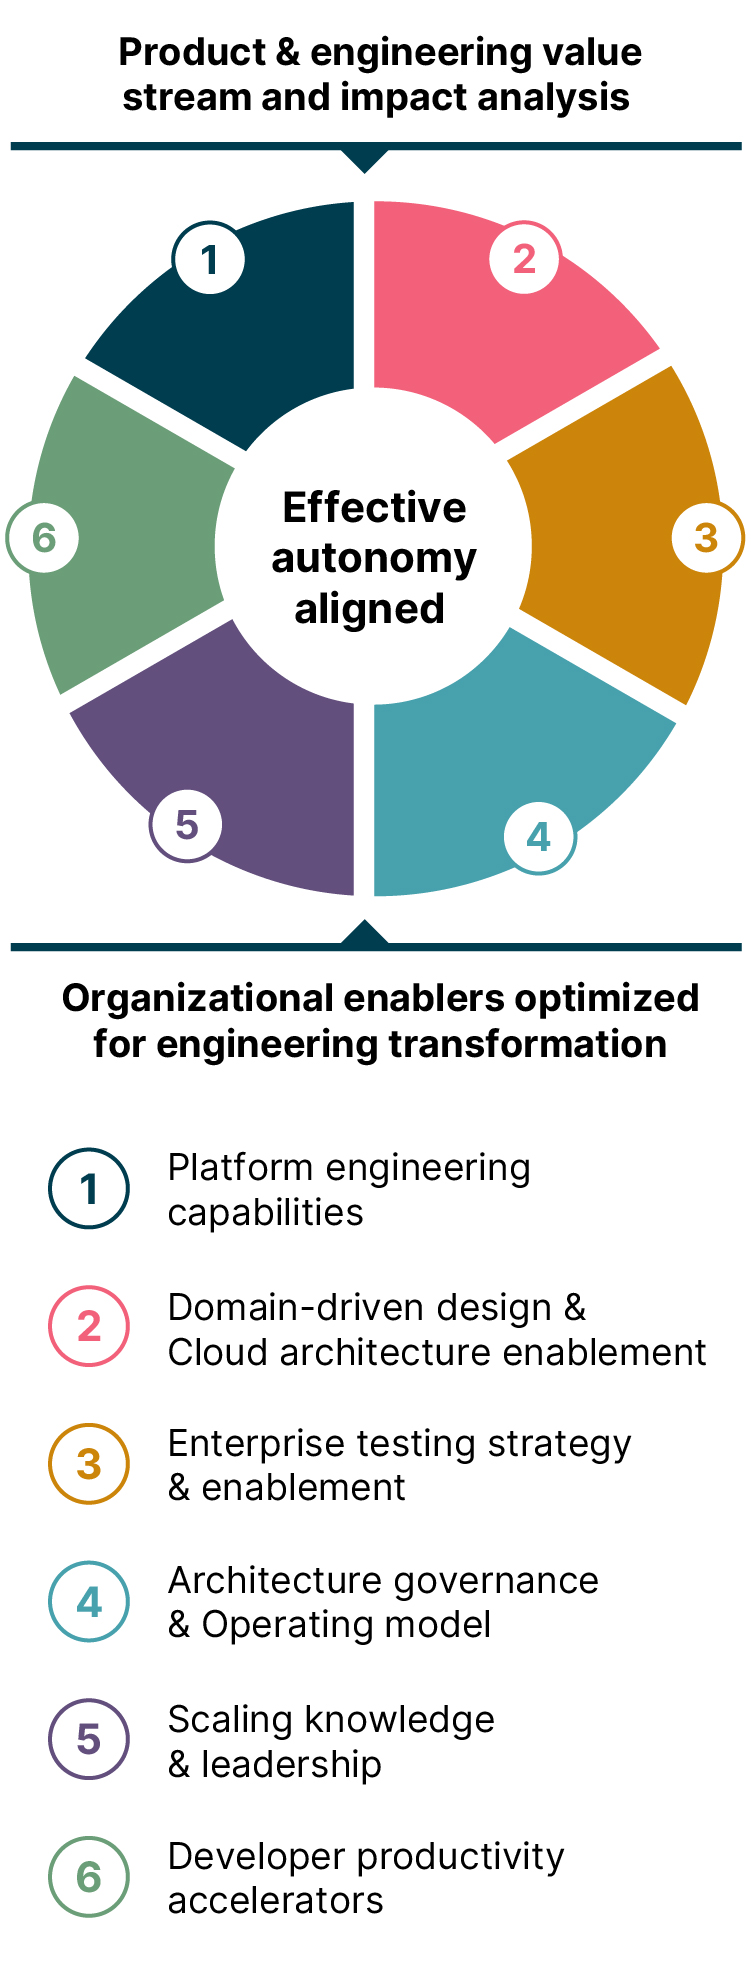 Flywheel of the 6 key areas of focus for engineering effectiveness: Platform engineering capabilities, Domain-driven design & Cloud architecture enablement, Enterprise testing strategy & enablement,  Architecture governance & Operating model, Scaling knowledge & leadership, Developer productivity accelerators.